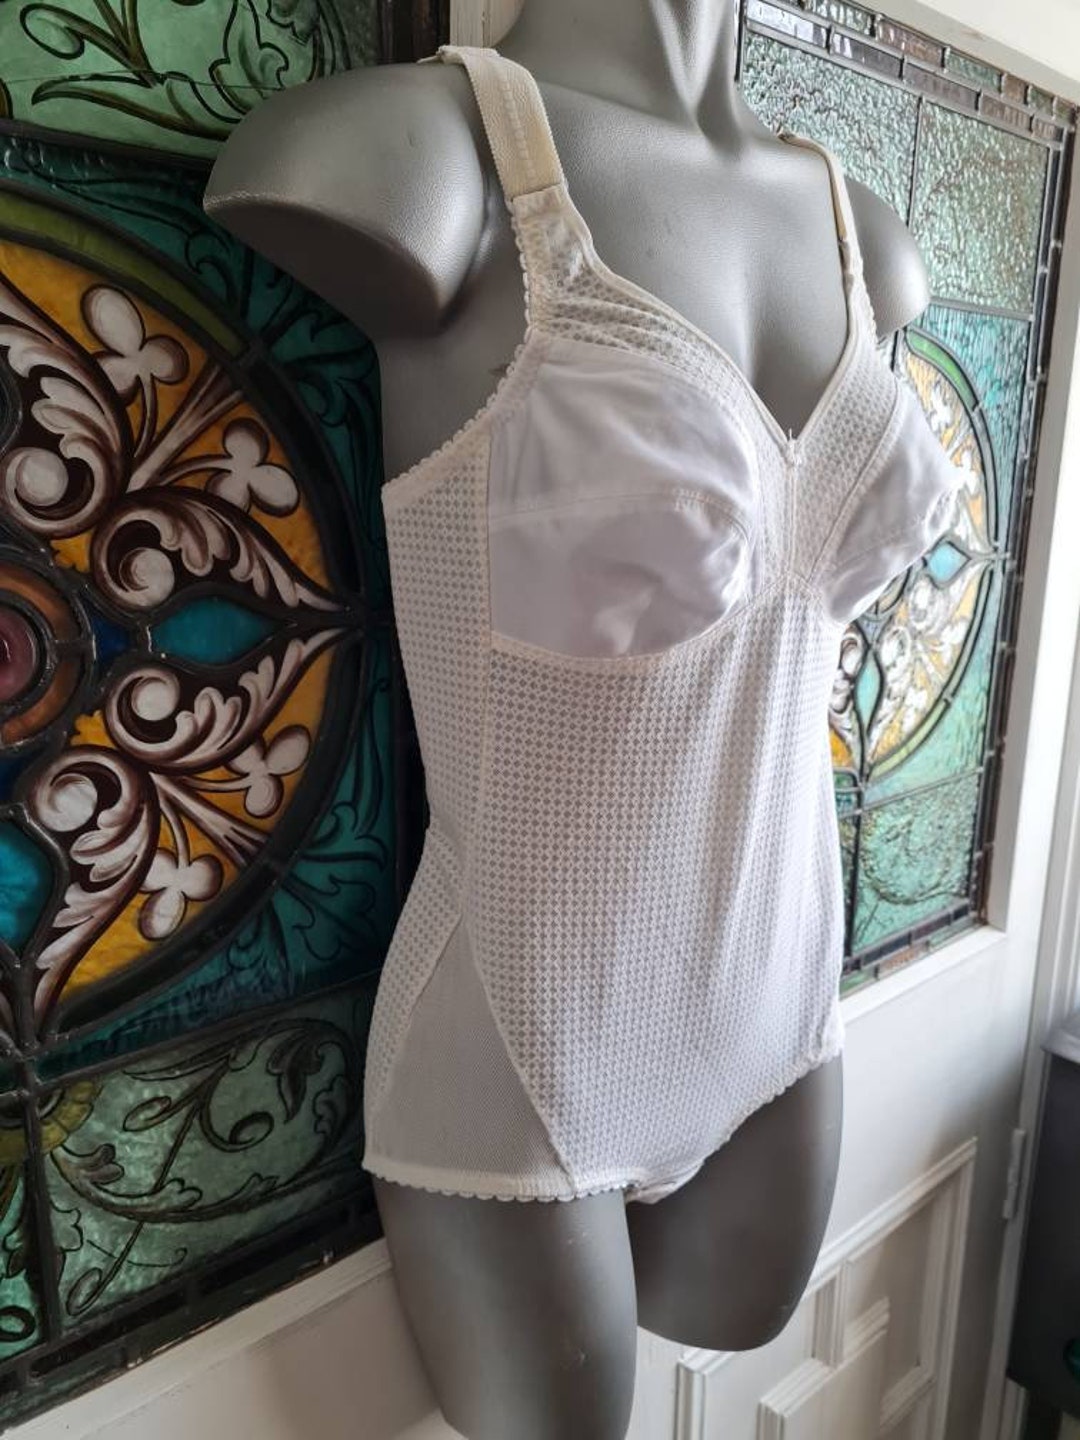 1950s Penney's Embossed Floral White Corset Girdle Size Large -  Canada